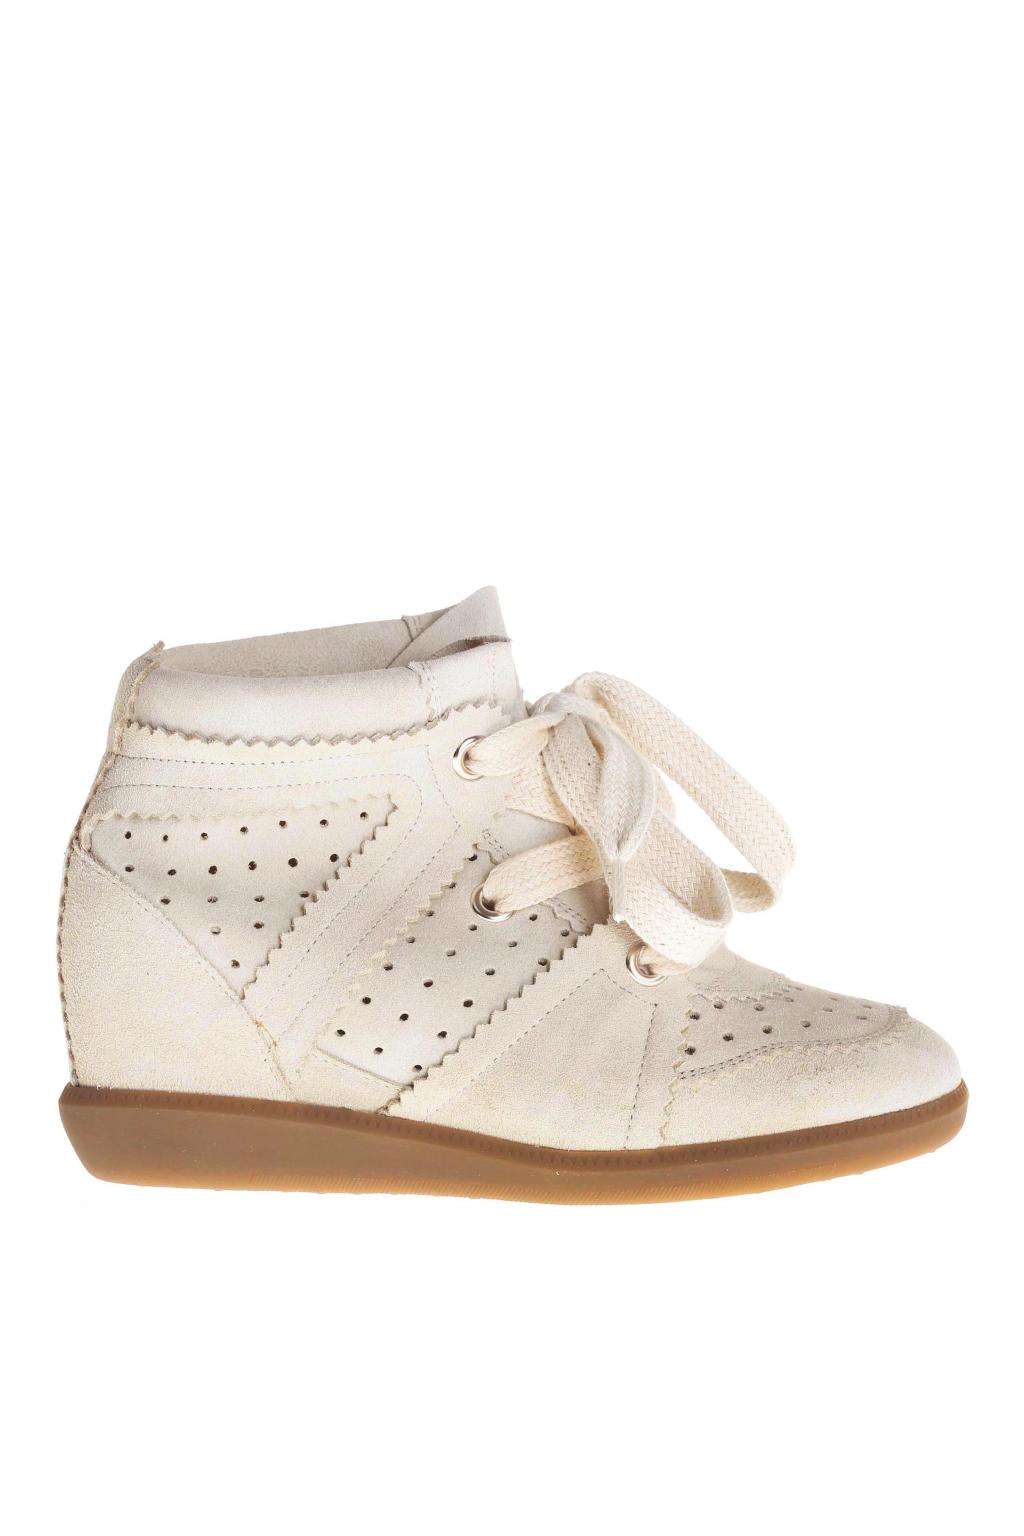 isabel marant bobby sneakers sale